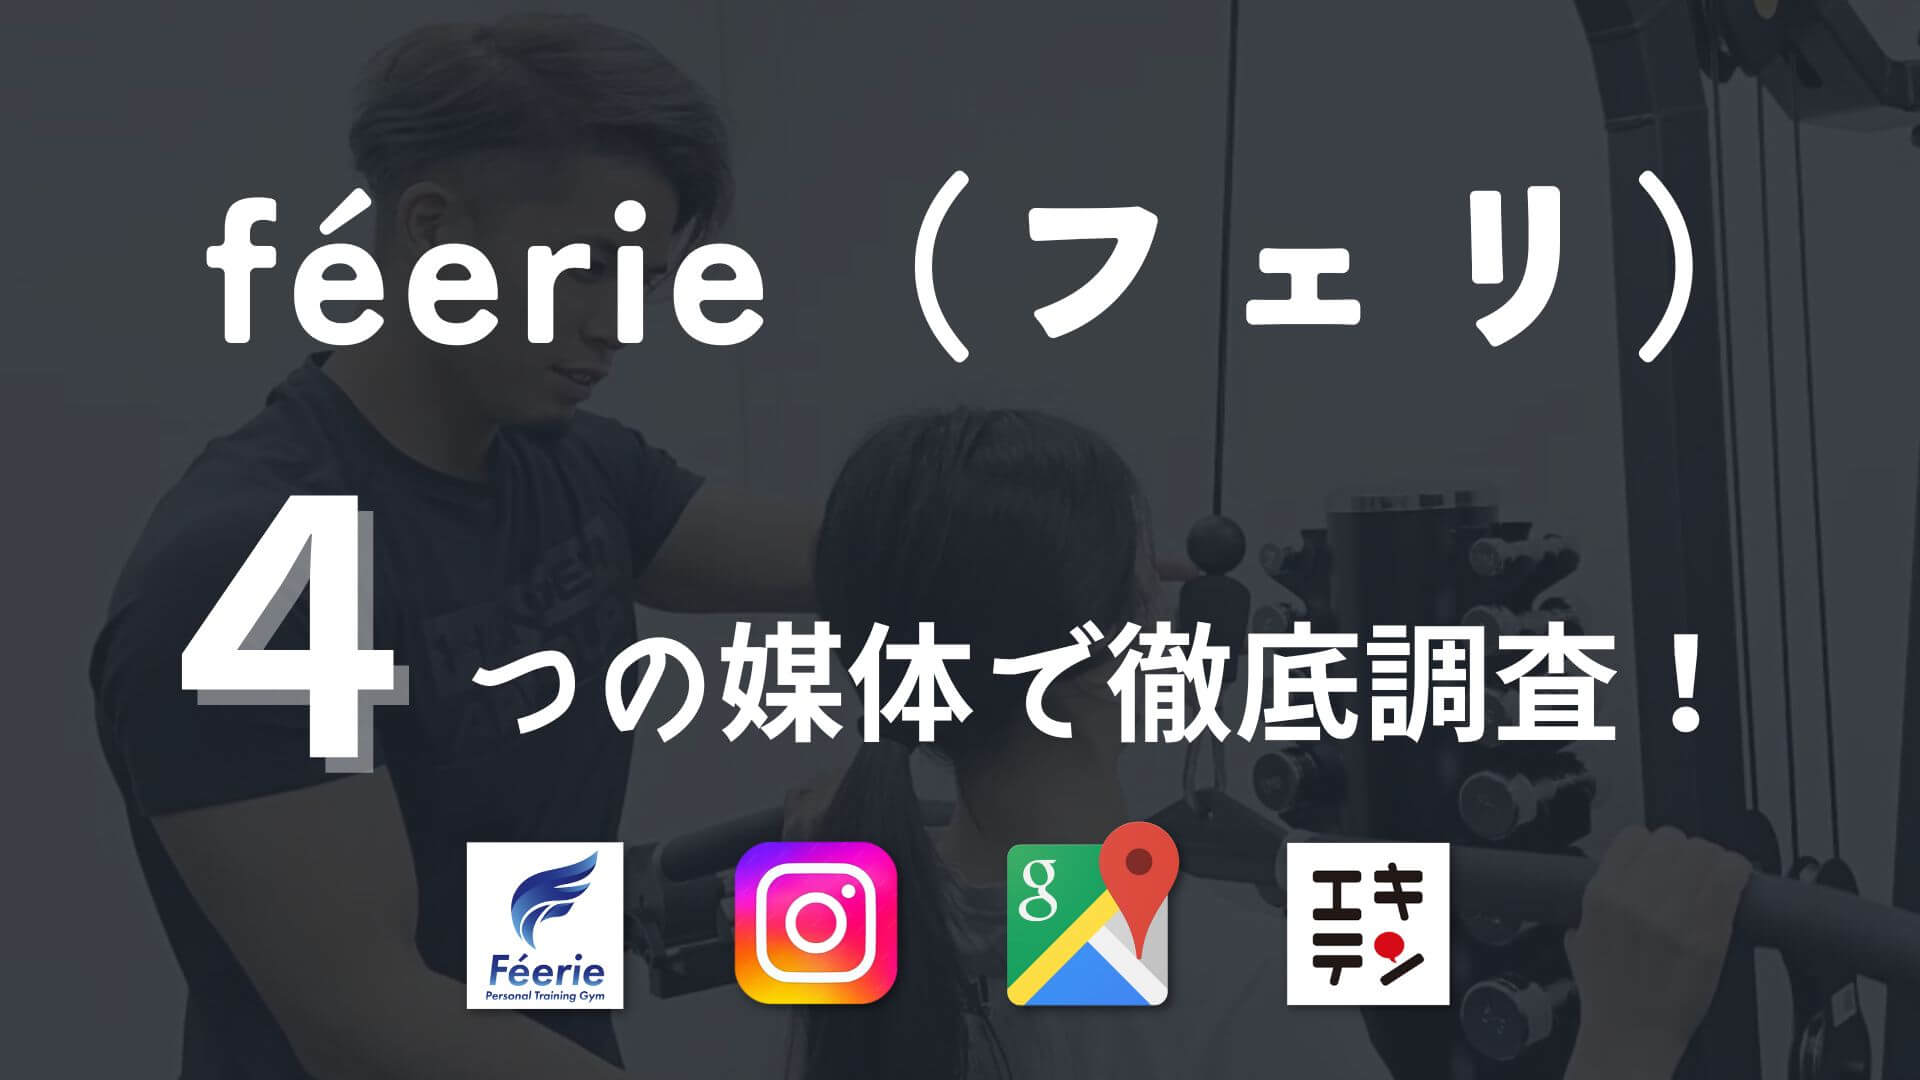 féerie（フェリ）の口コミや評判を4つの媒体で徹底調査！